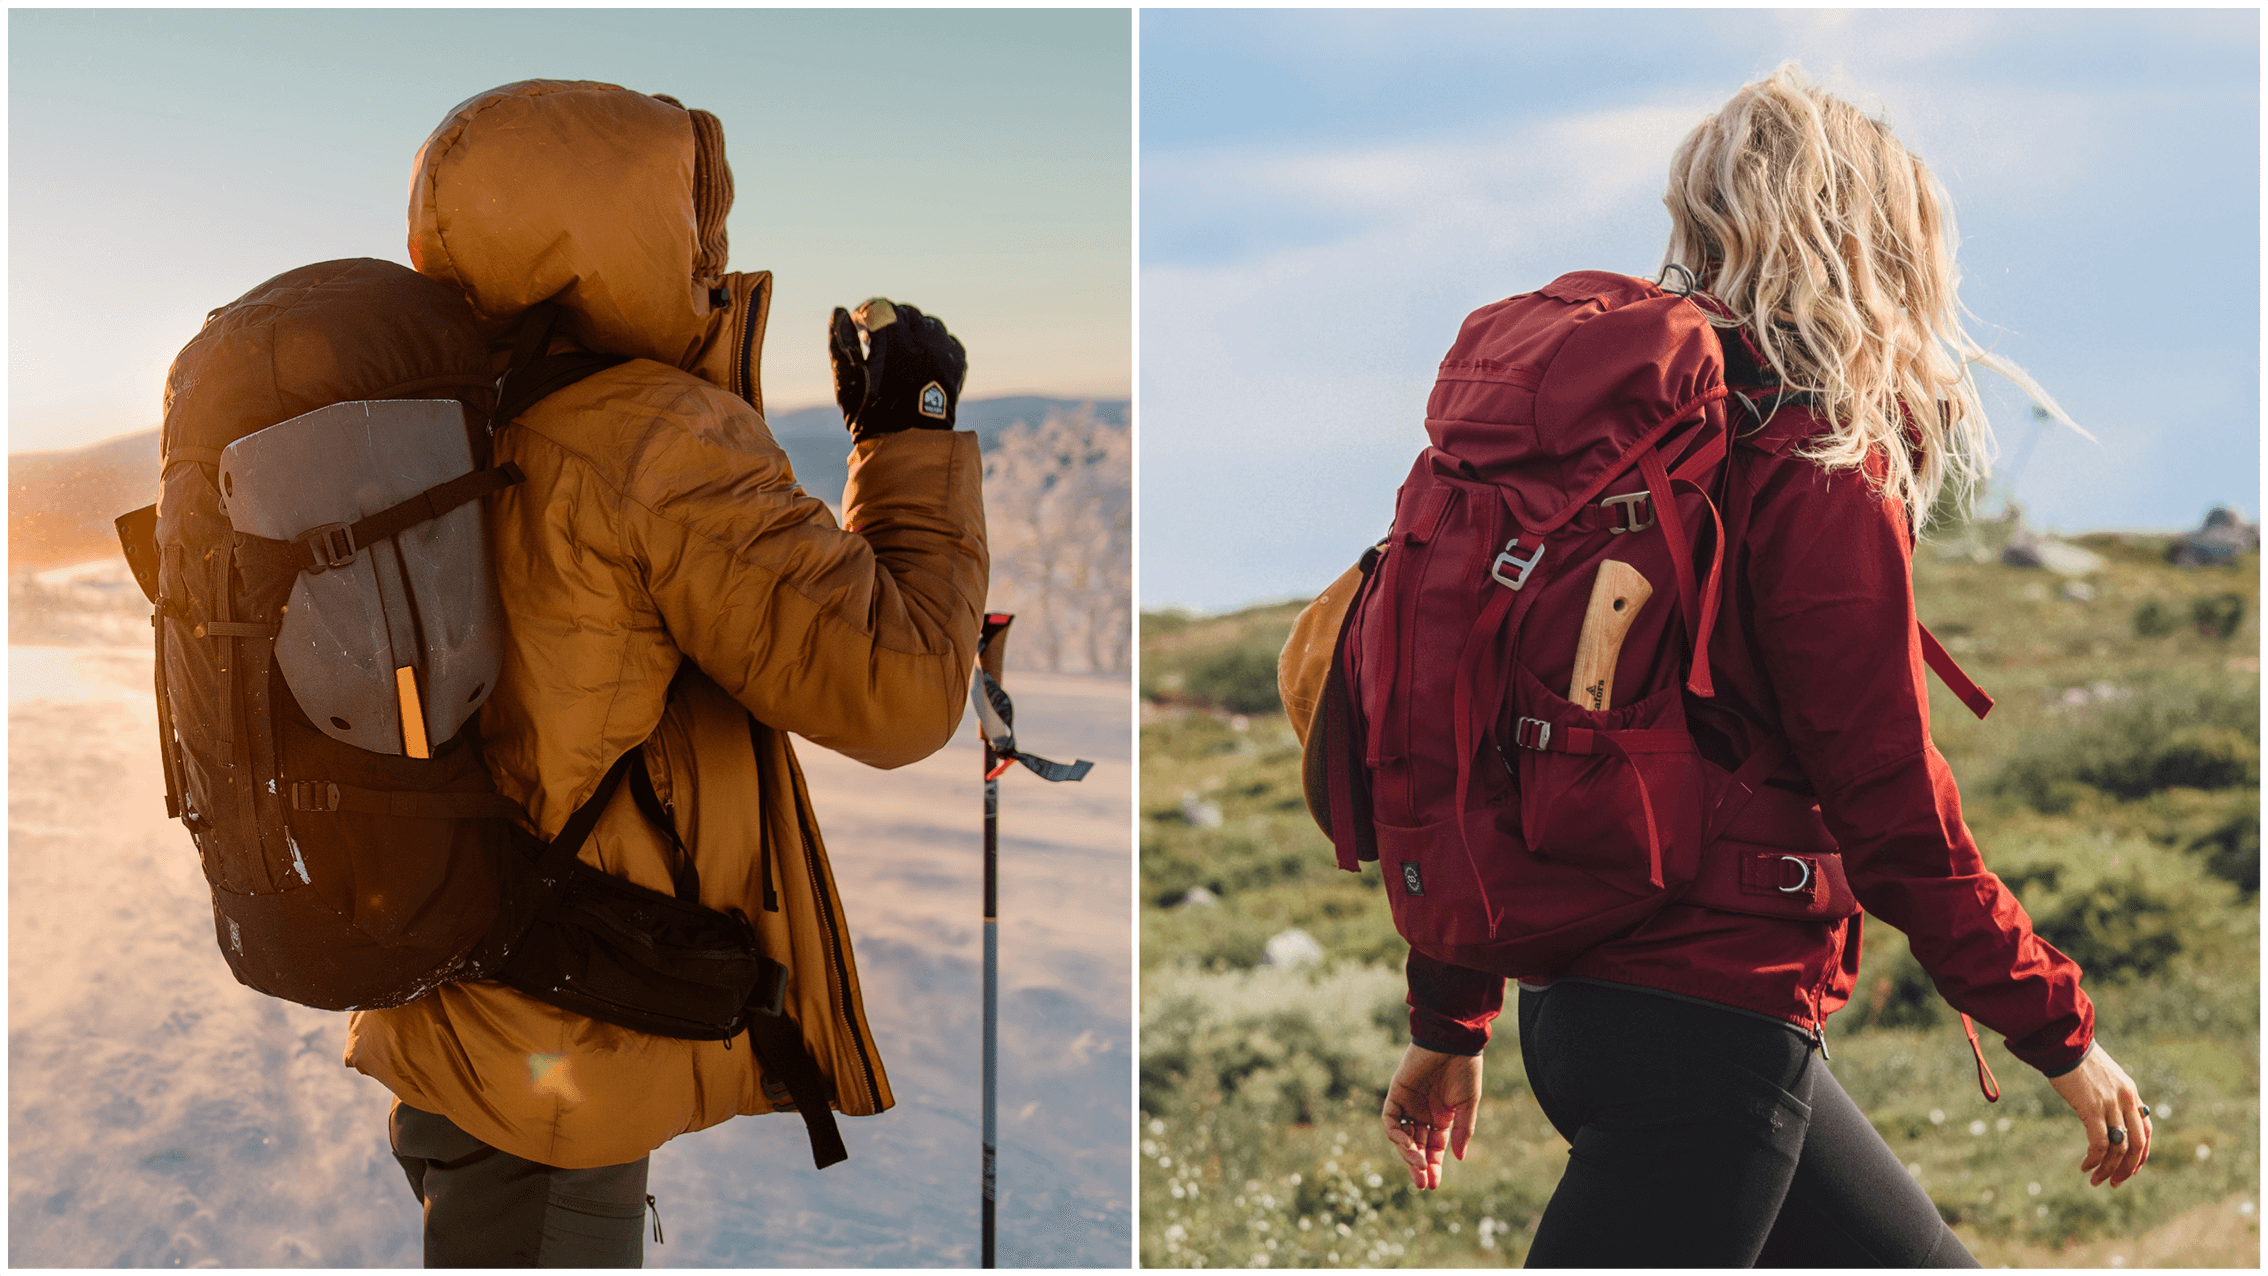 maïs hardware roltrap Find the right backpack for your adventure | Lundhags